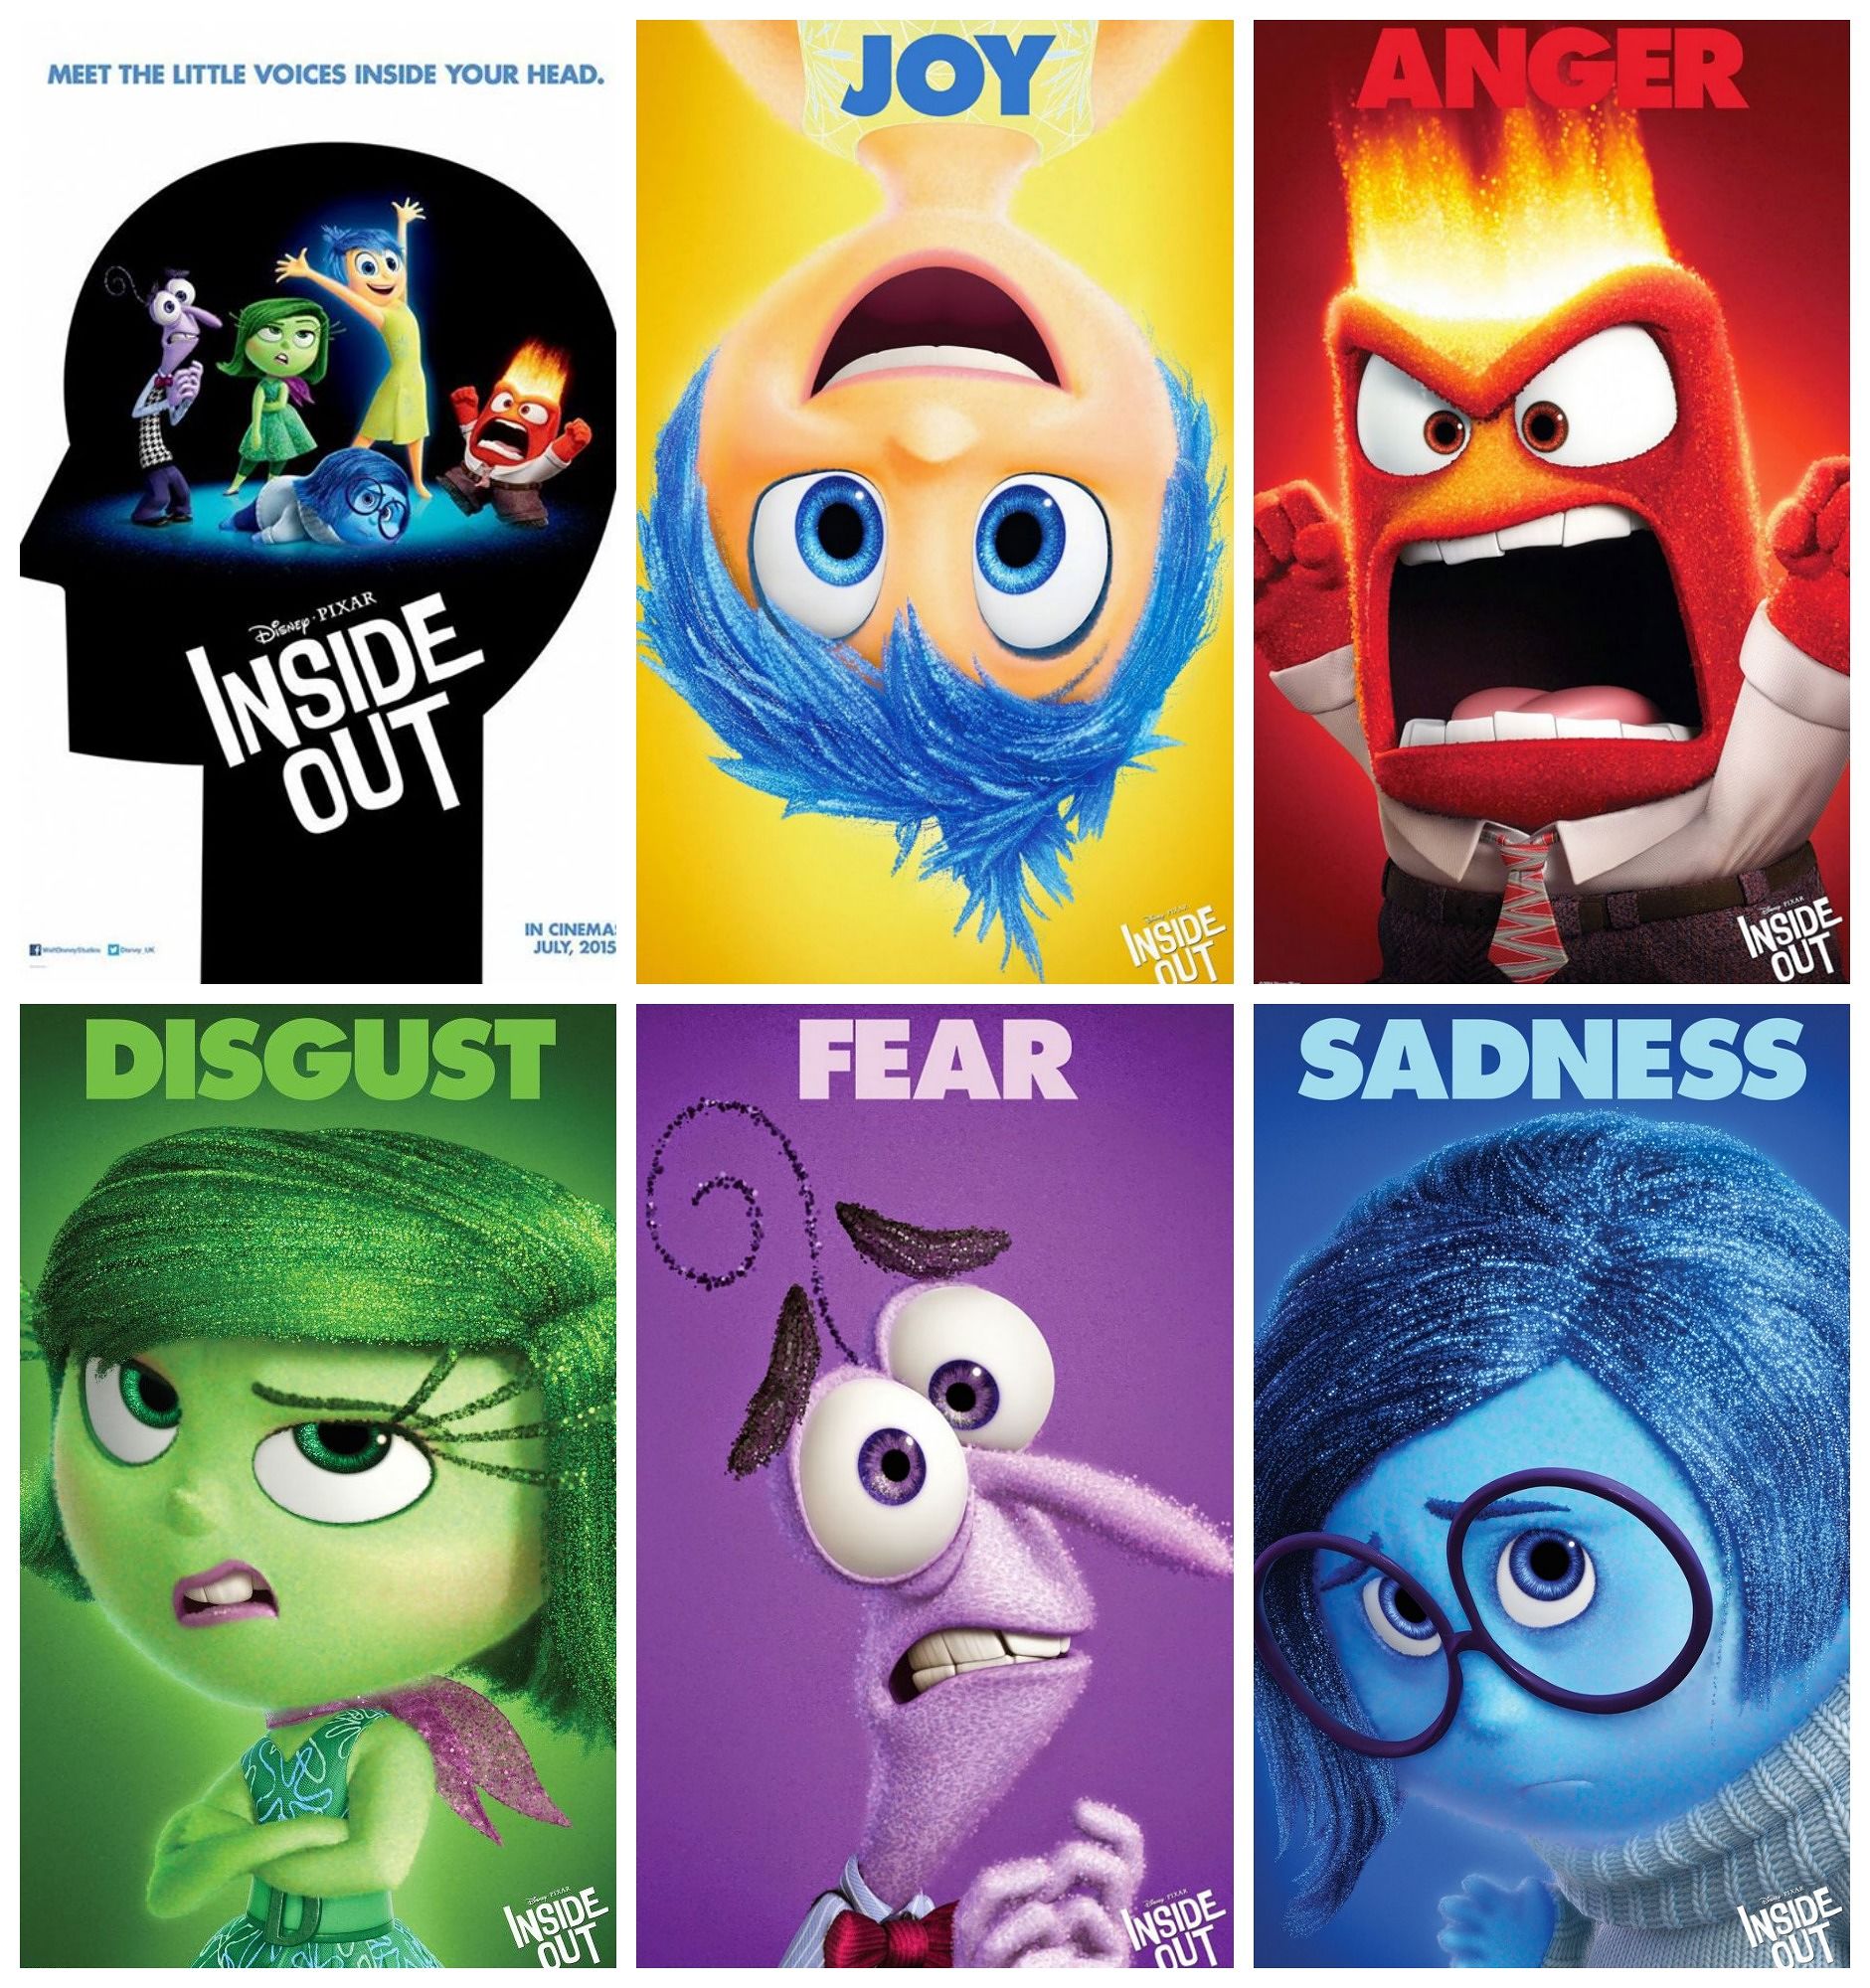 Pixar’s core emotions in the film: Inside out